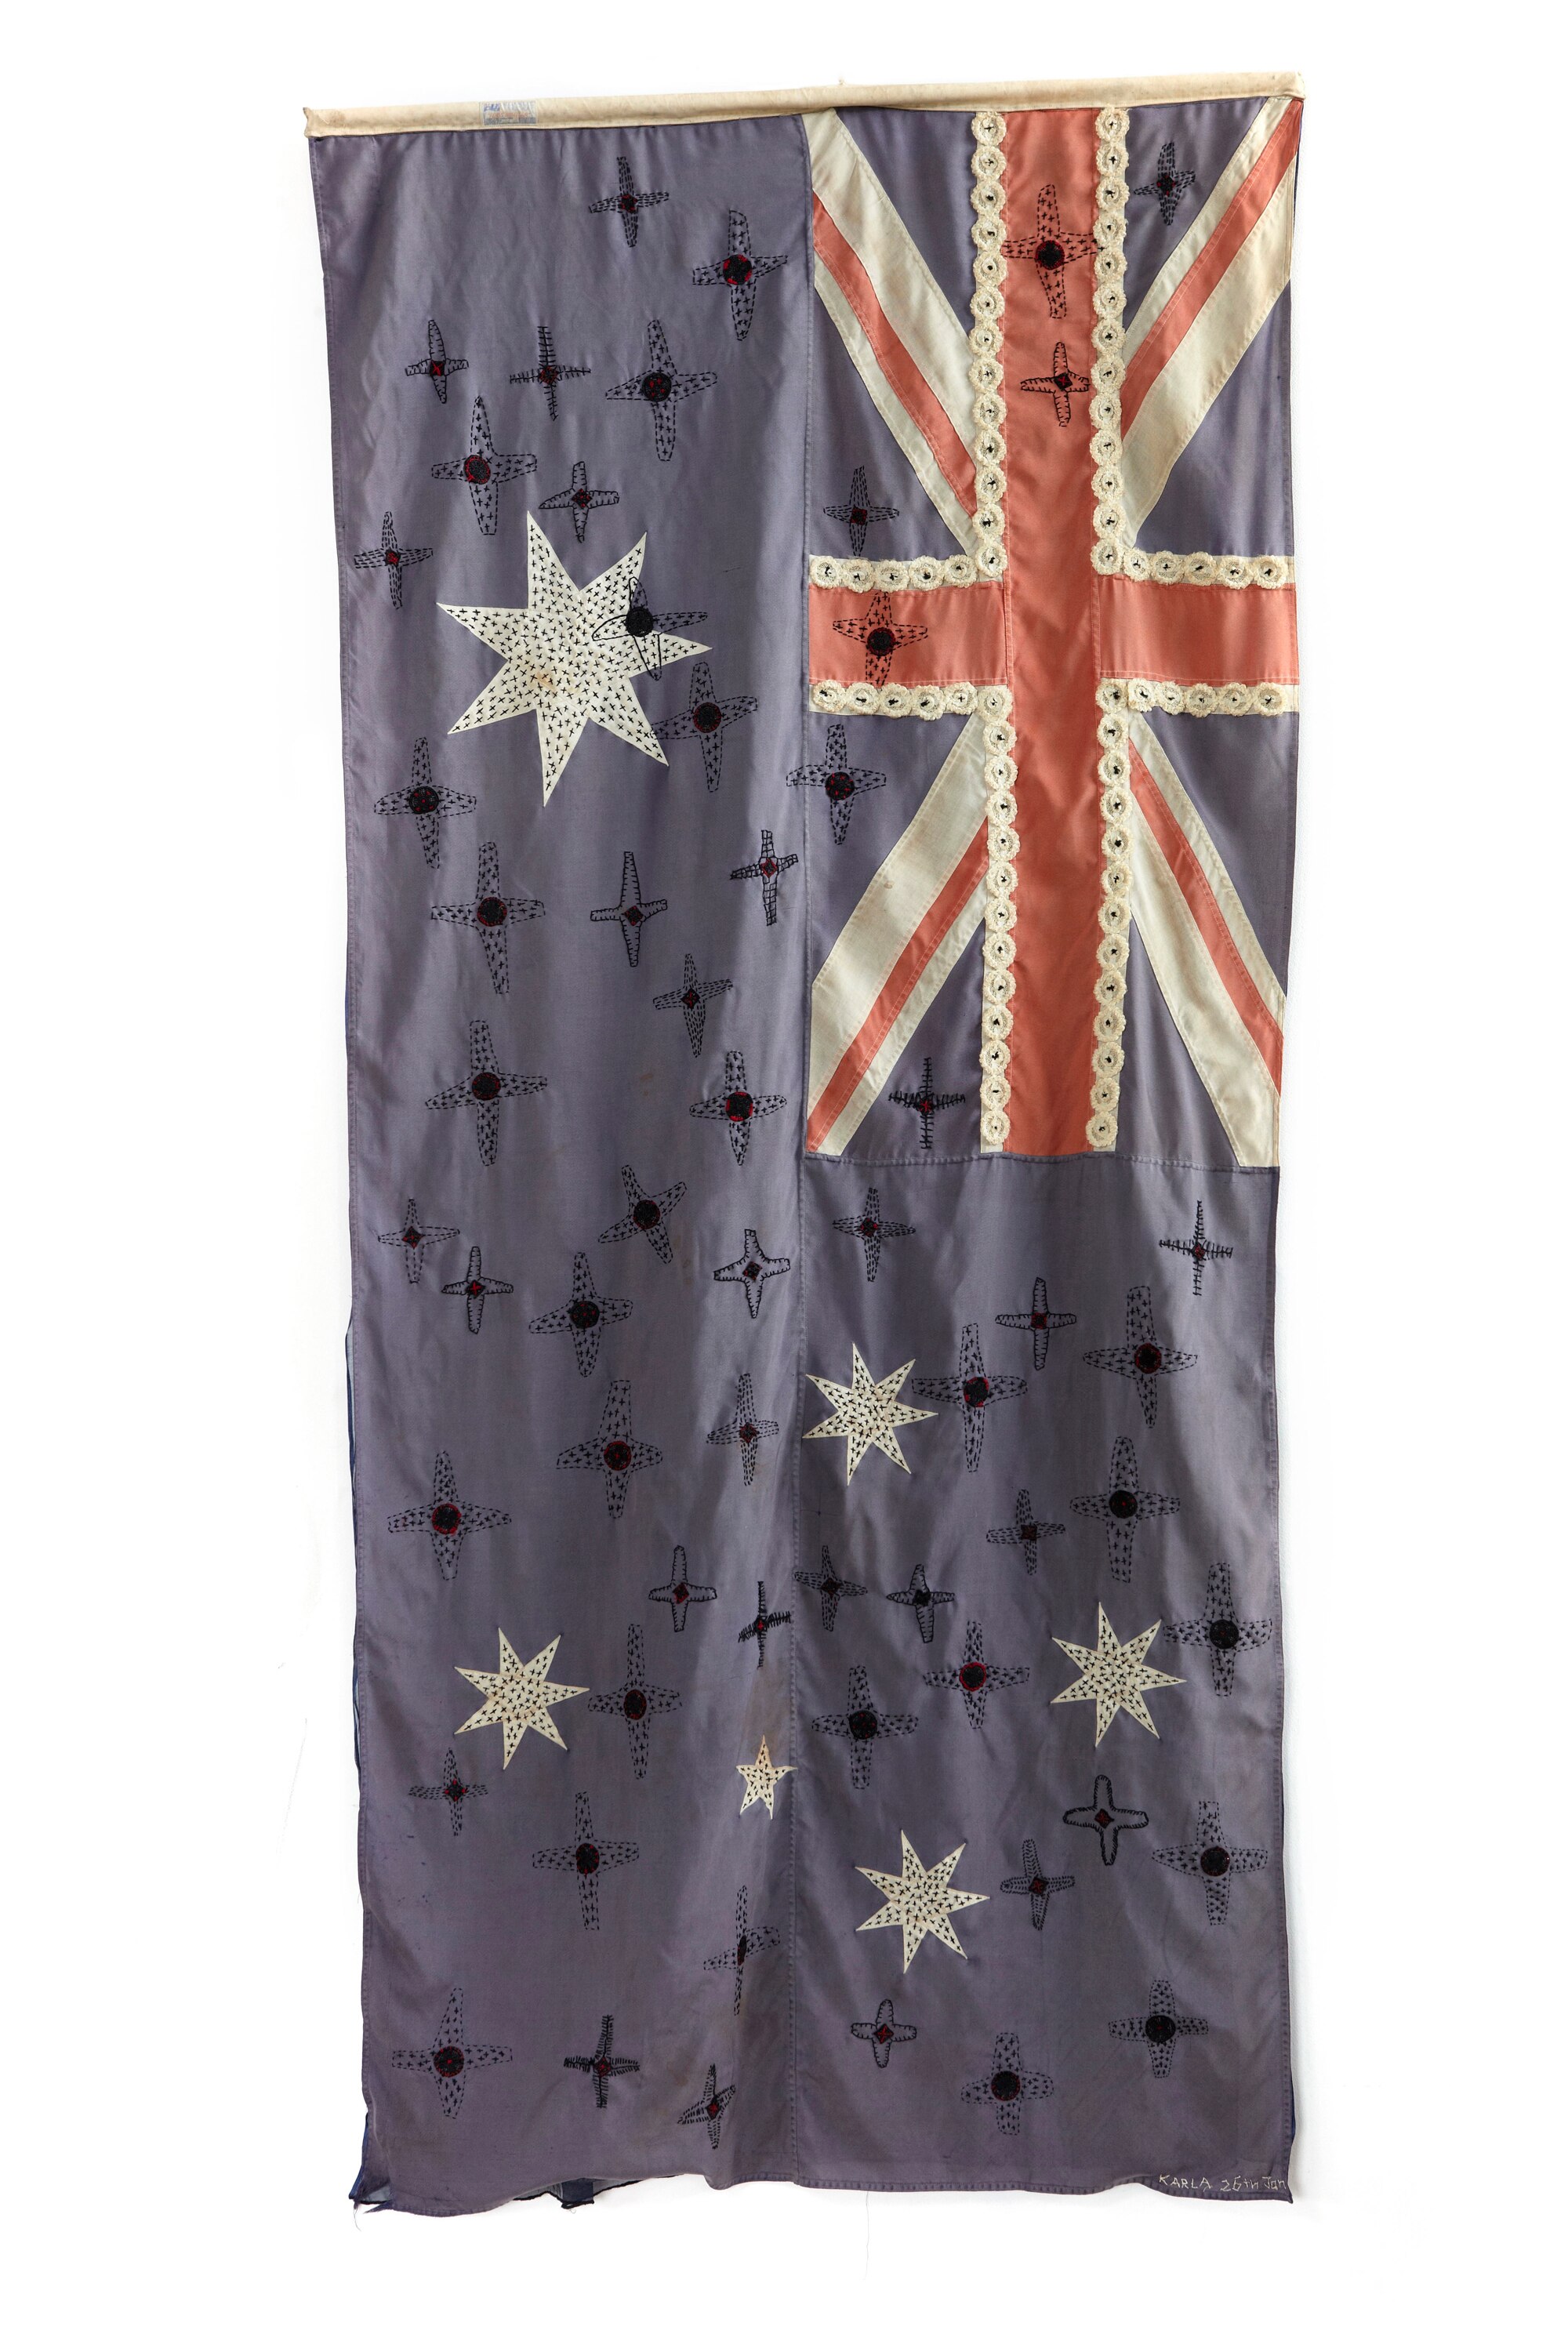 An old Australian flag onto which crosses, dots, stars and shell buttons are embroidered